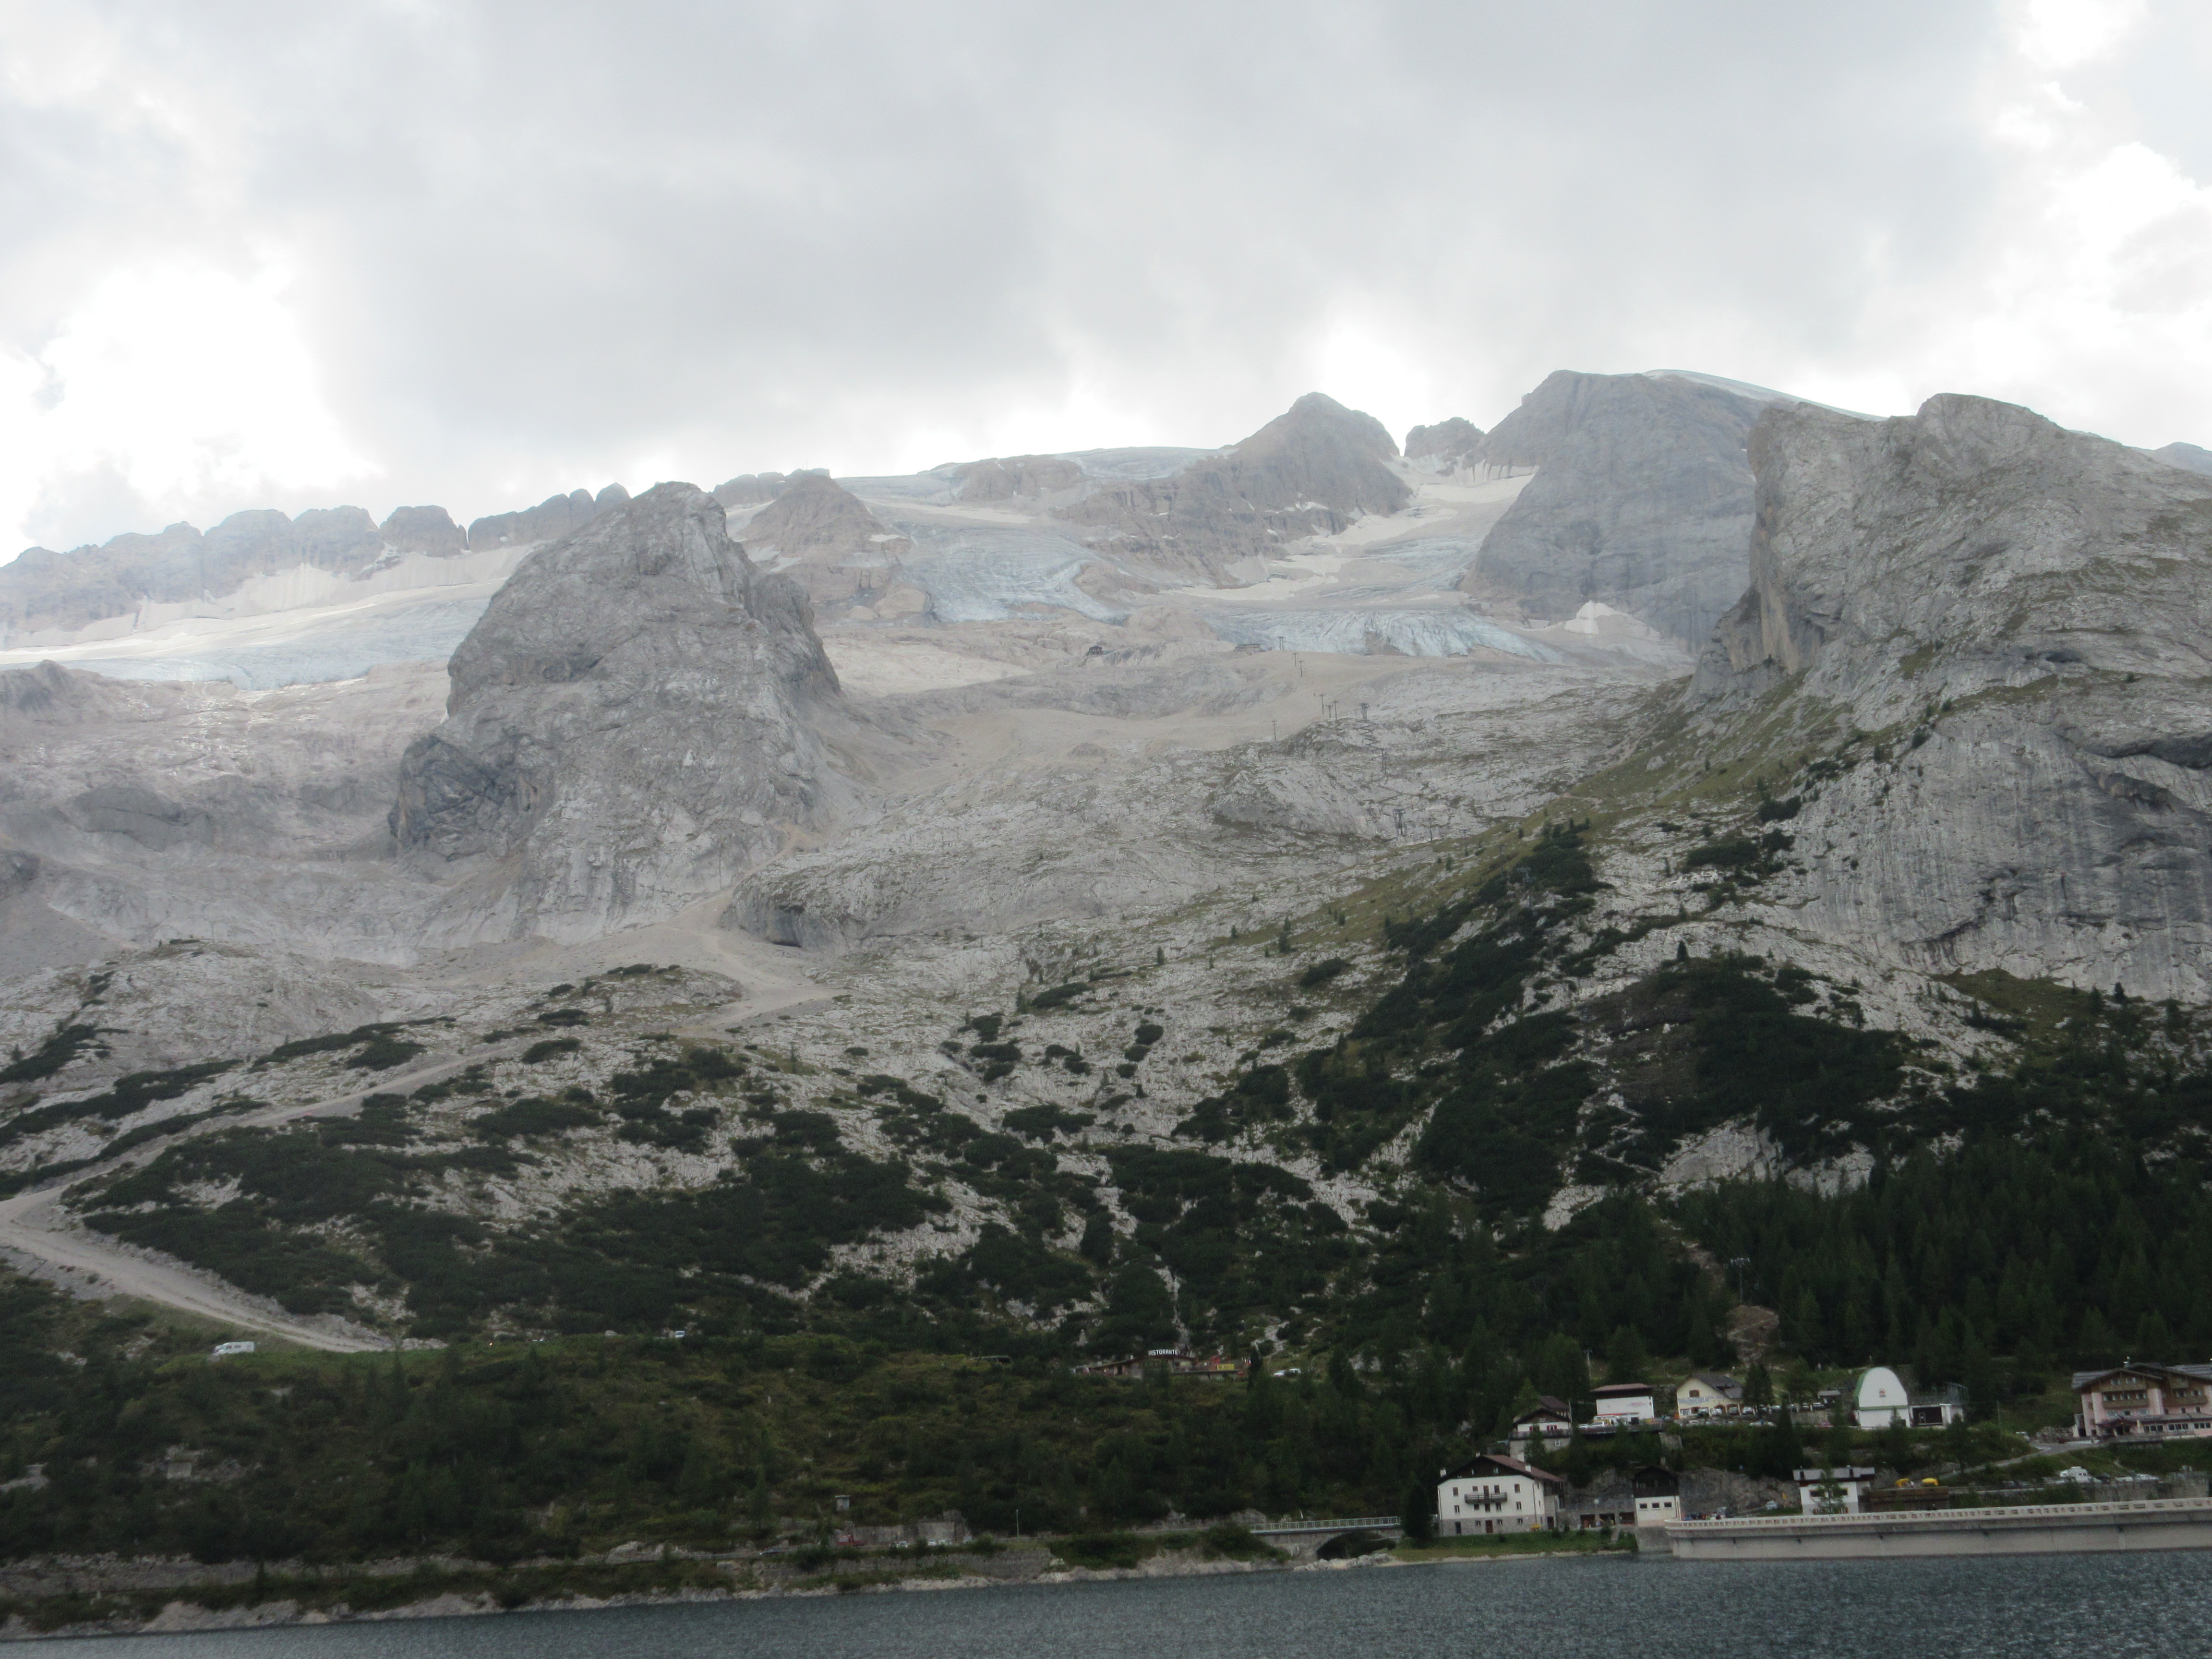 The rapidly disappearing Marmolada glacier in the Dolomites in northern Italy, near the Austrian border. 